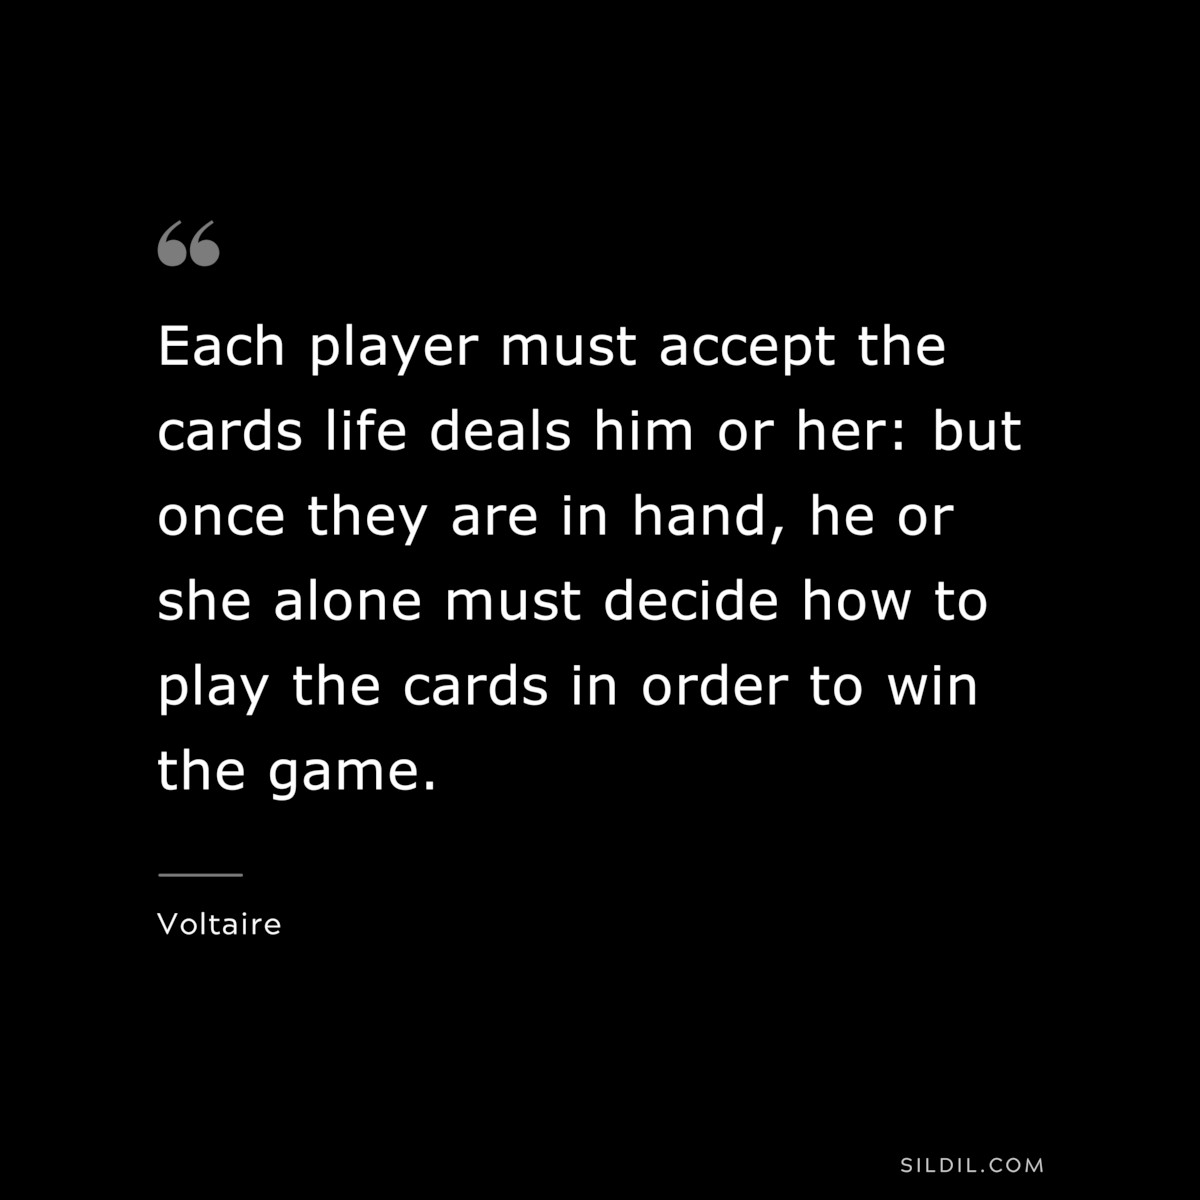 Each player must accept the cards life deals him or her: but once they are in hand, he or she alone must decide how to play the cards in order to win the game. ― Voltaire